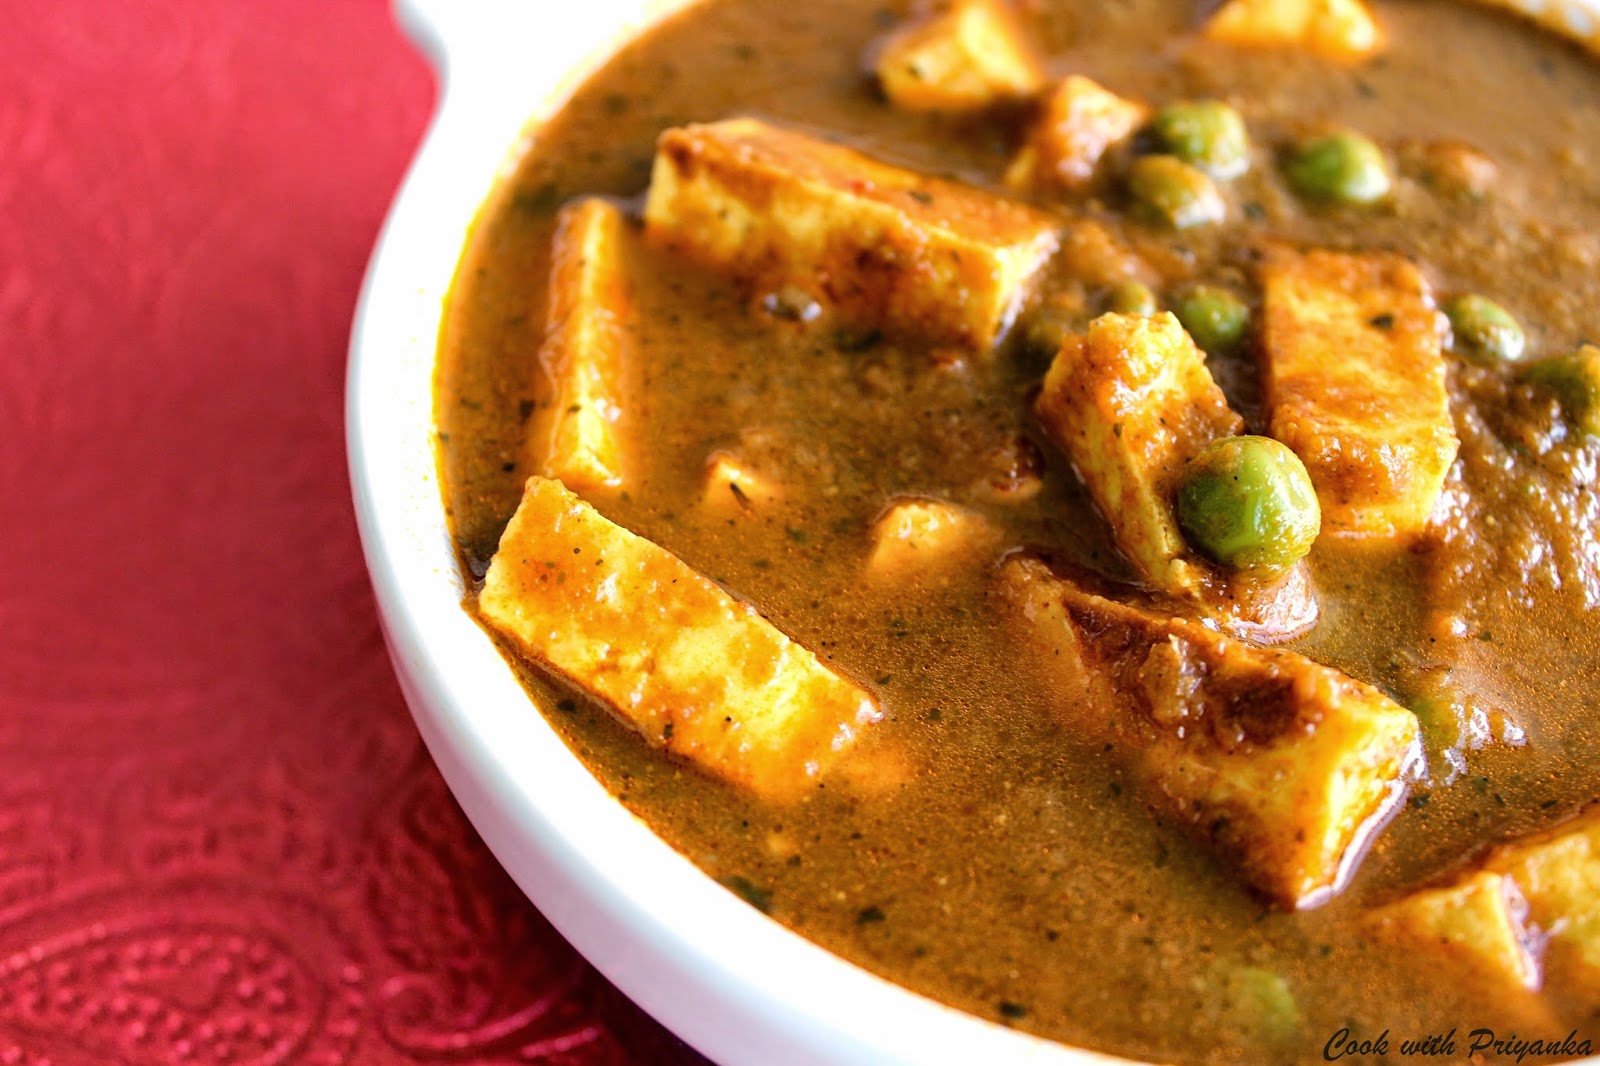 http://cookwithpriyankavarma.blogspot.co.uk/2014/05/matar-paneer-cottage-cheese-with-peas.html